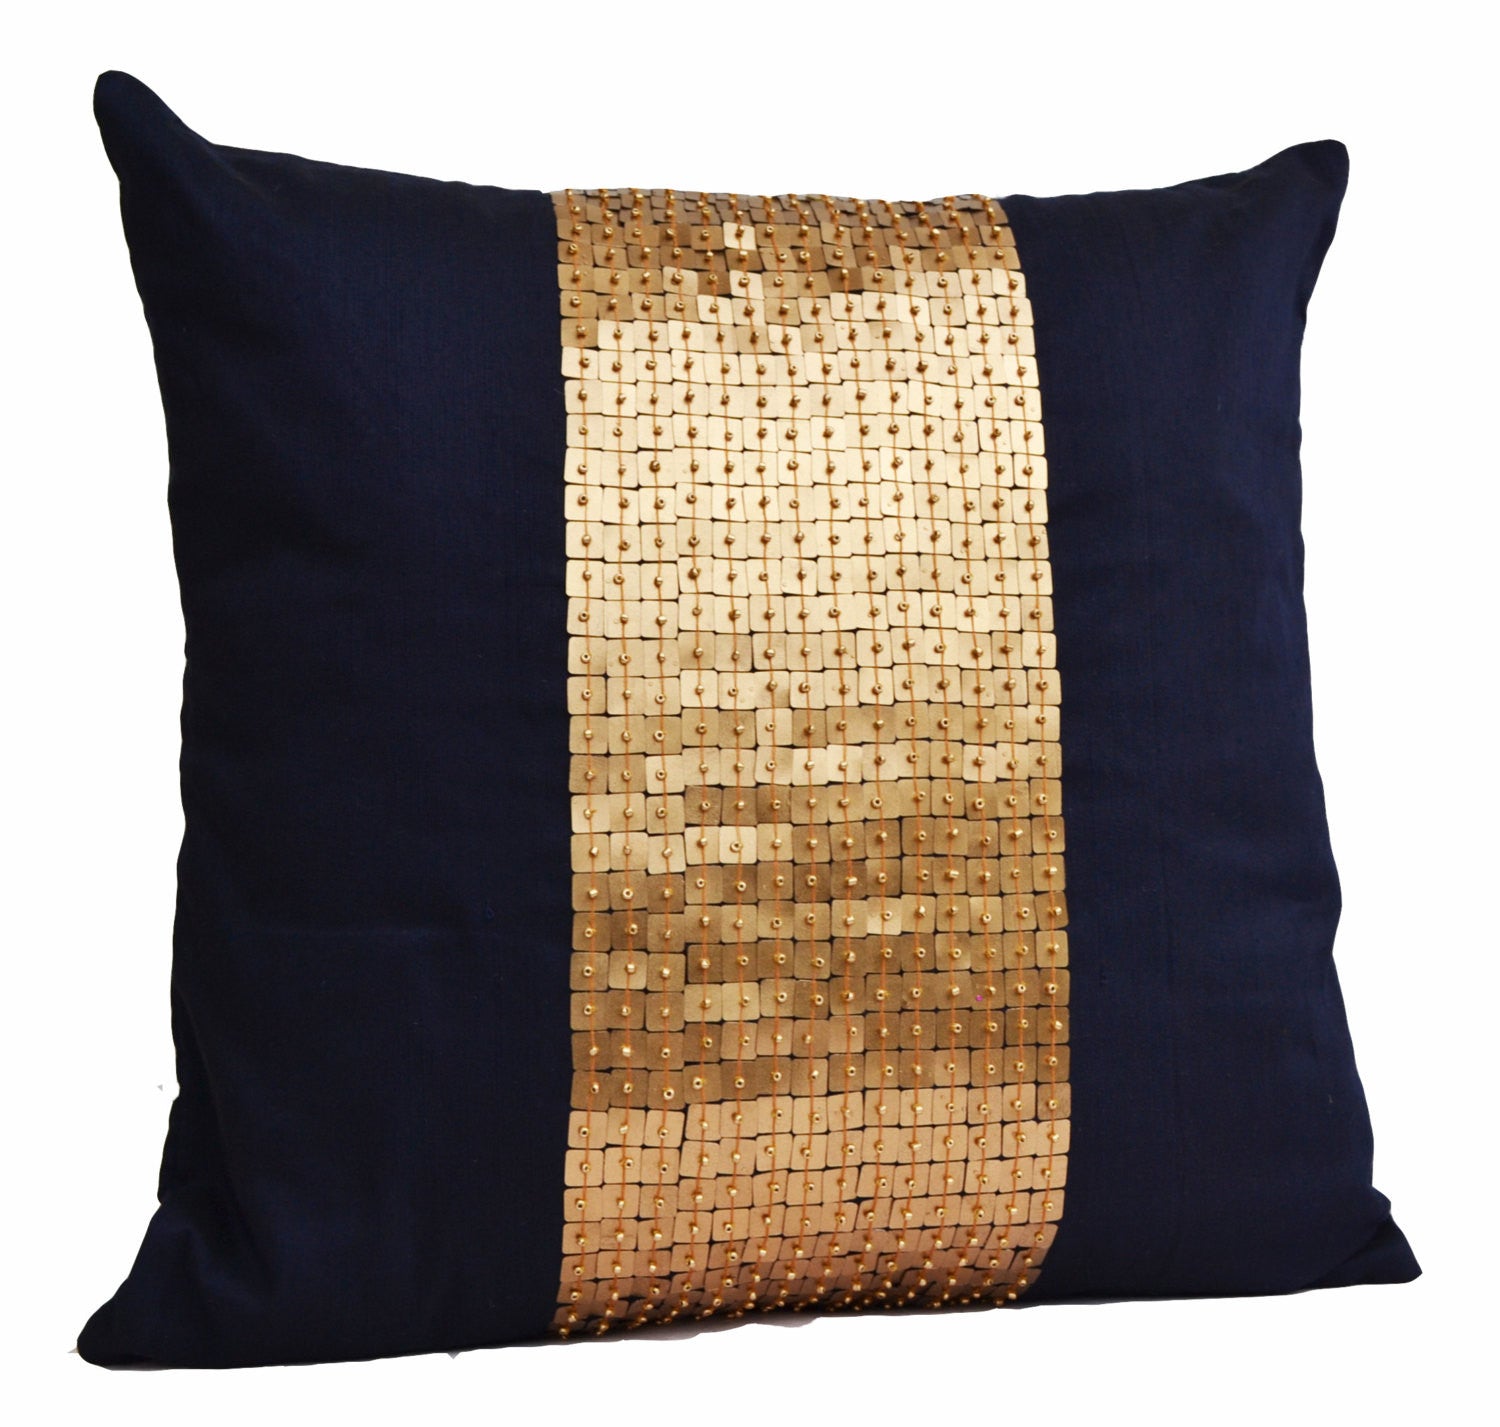 Handmade navy blue throw pillow cover with gold silk sequin